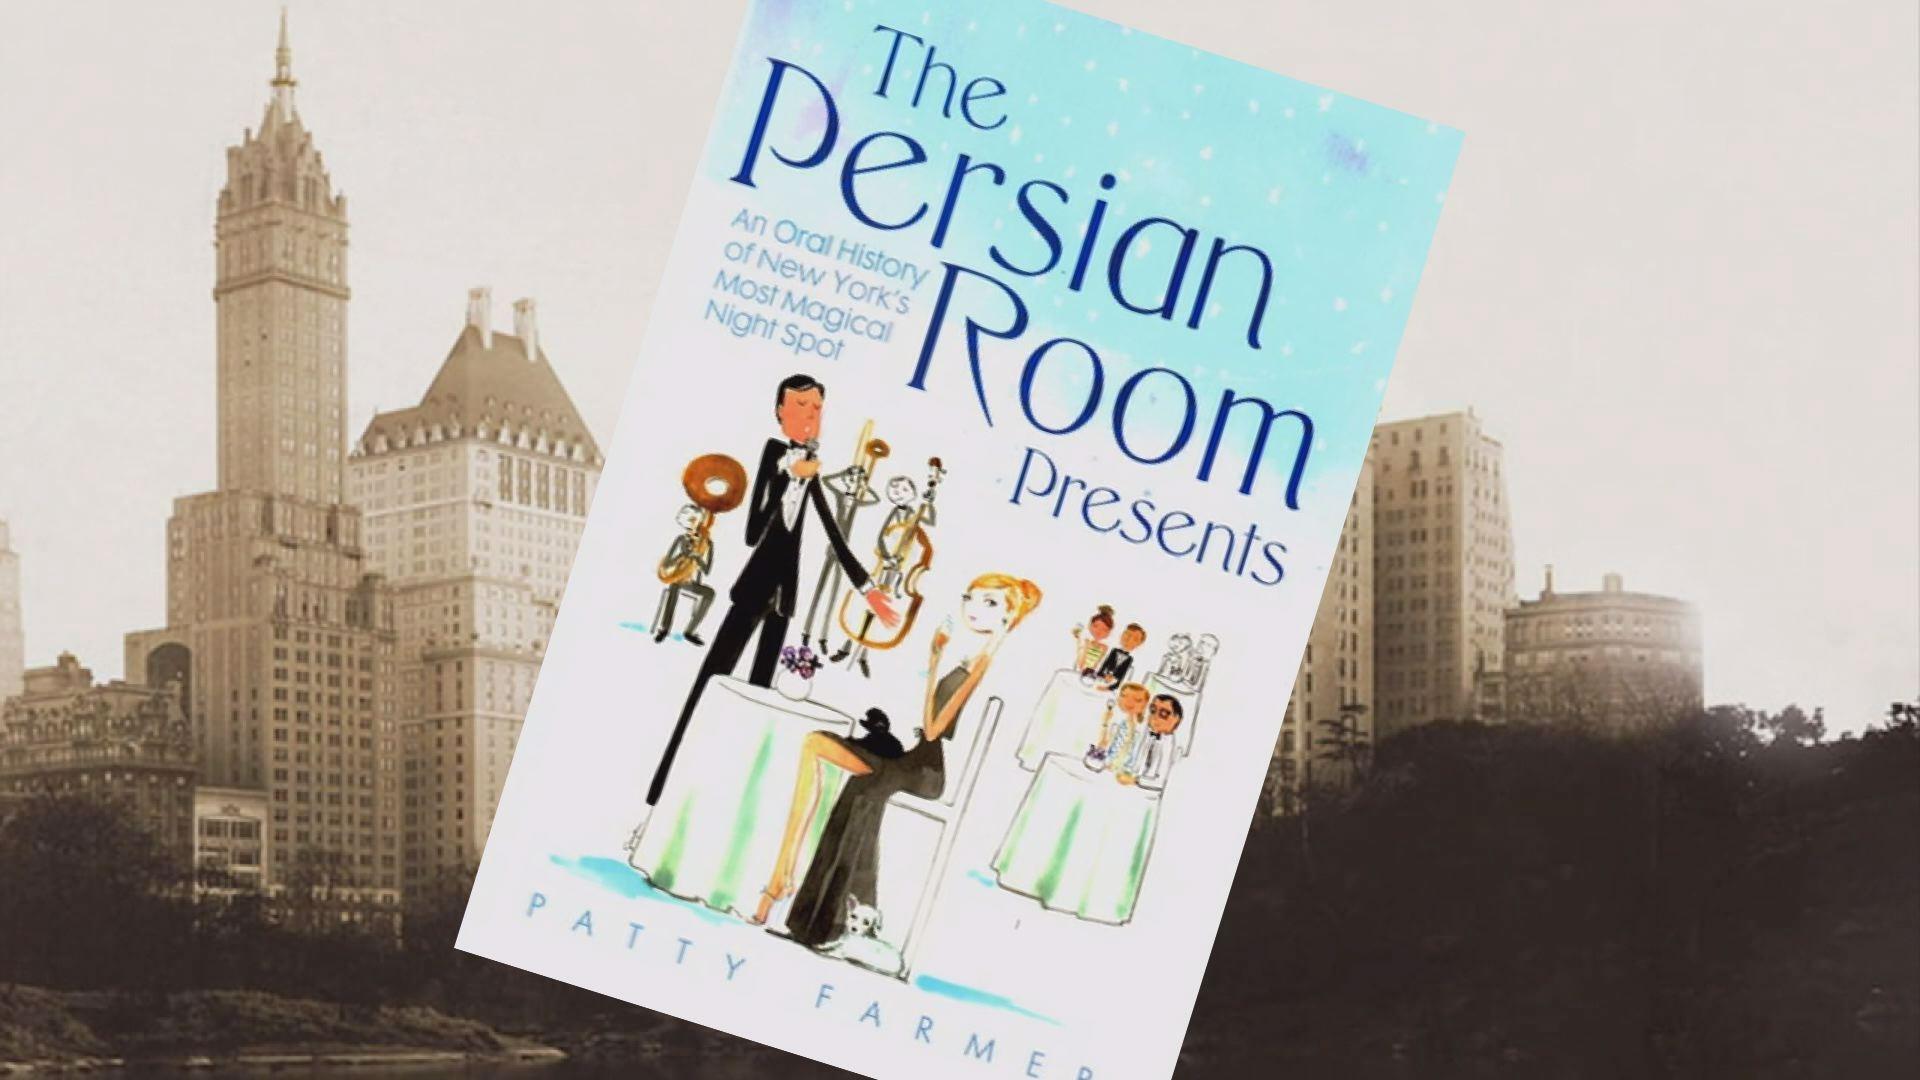 The Persian Room